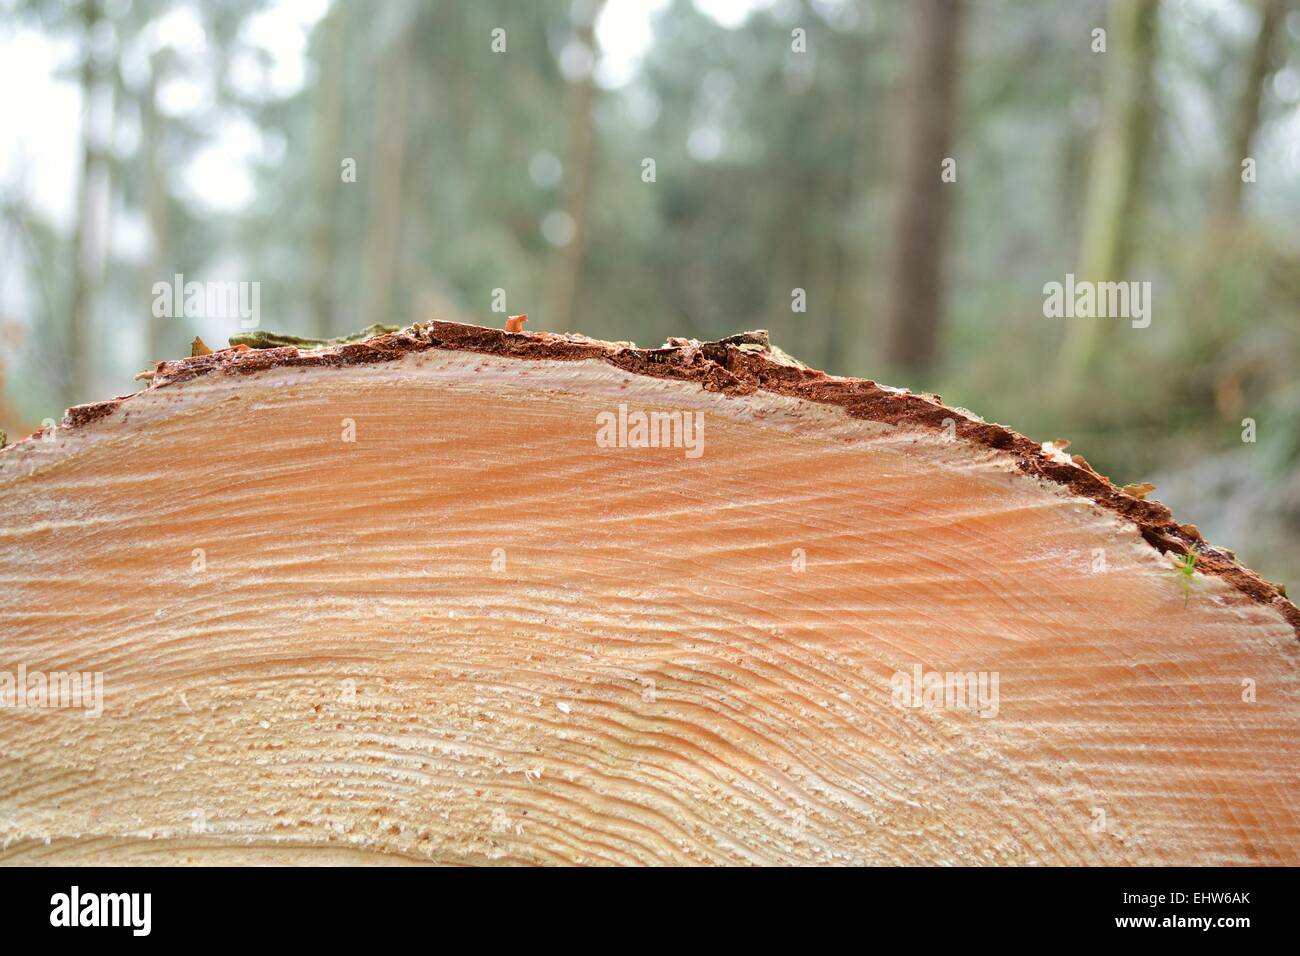 Detail of a tree-sectional area Stock Photo